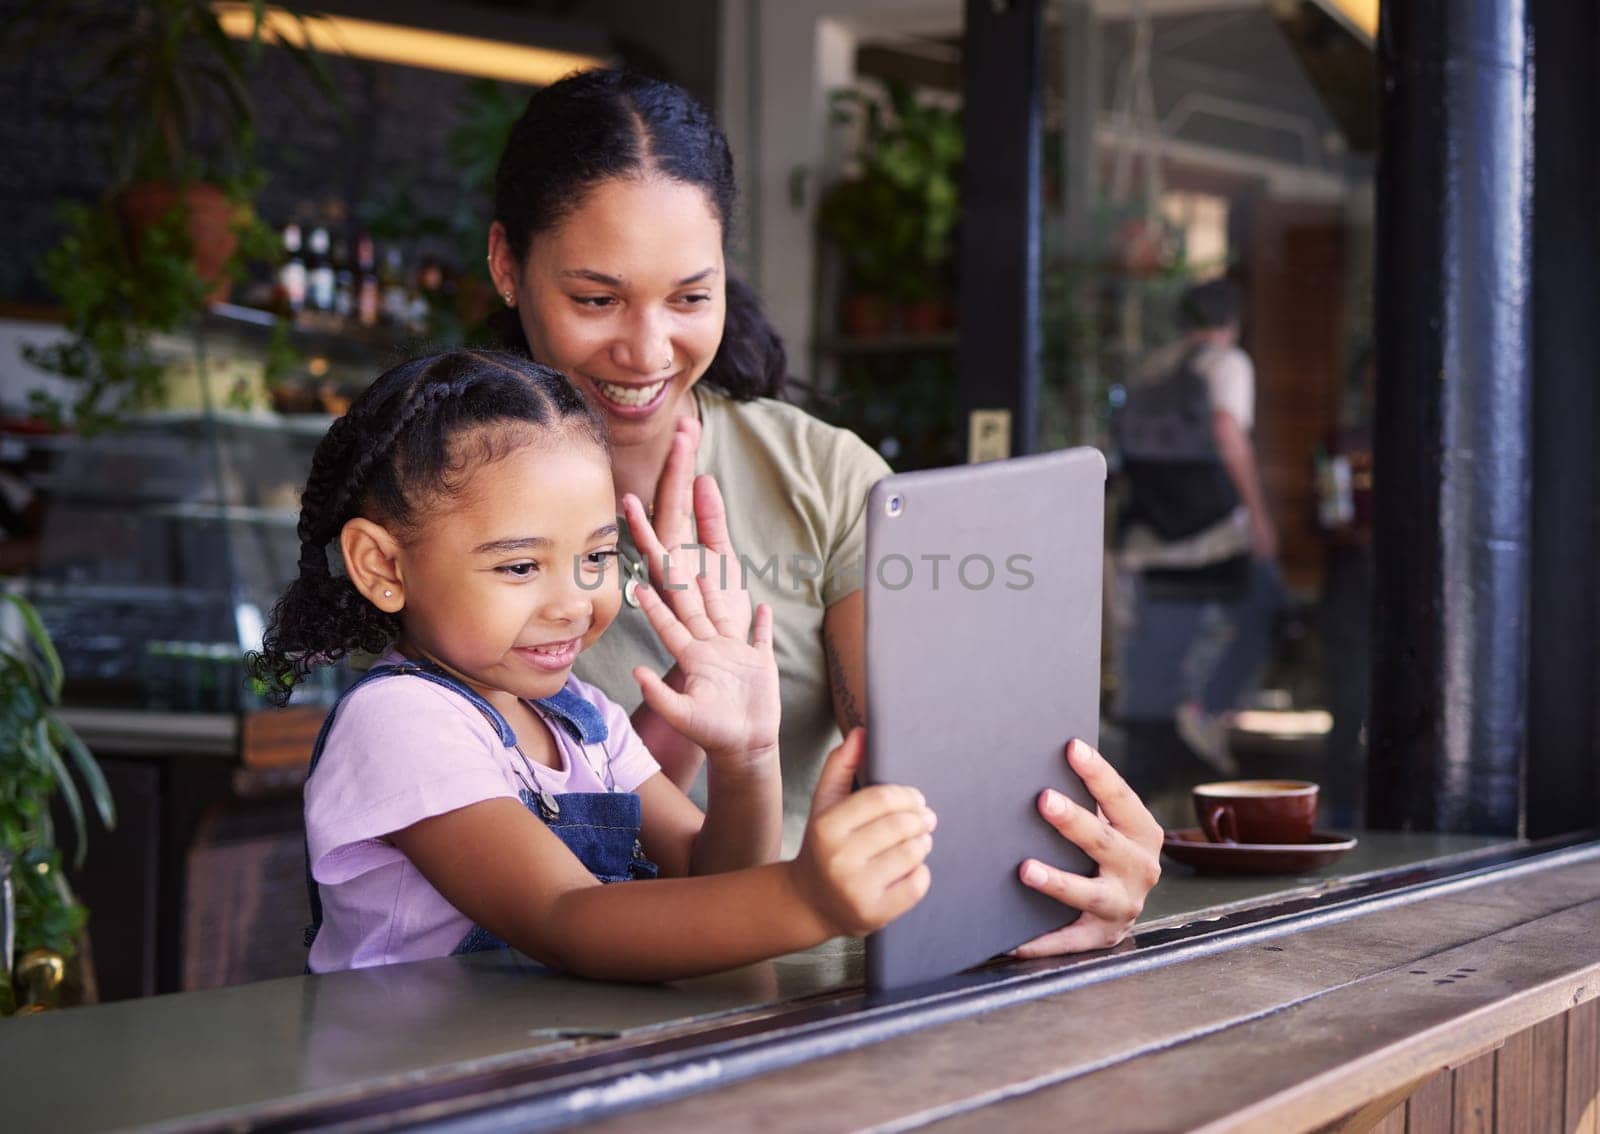 Video call, restaurant and woman and girl with a tablet waving on social media, online and app at a coffee shop. Kid, daughter and child with parent on the internet for communication and talking.